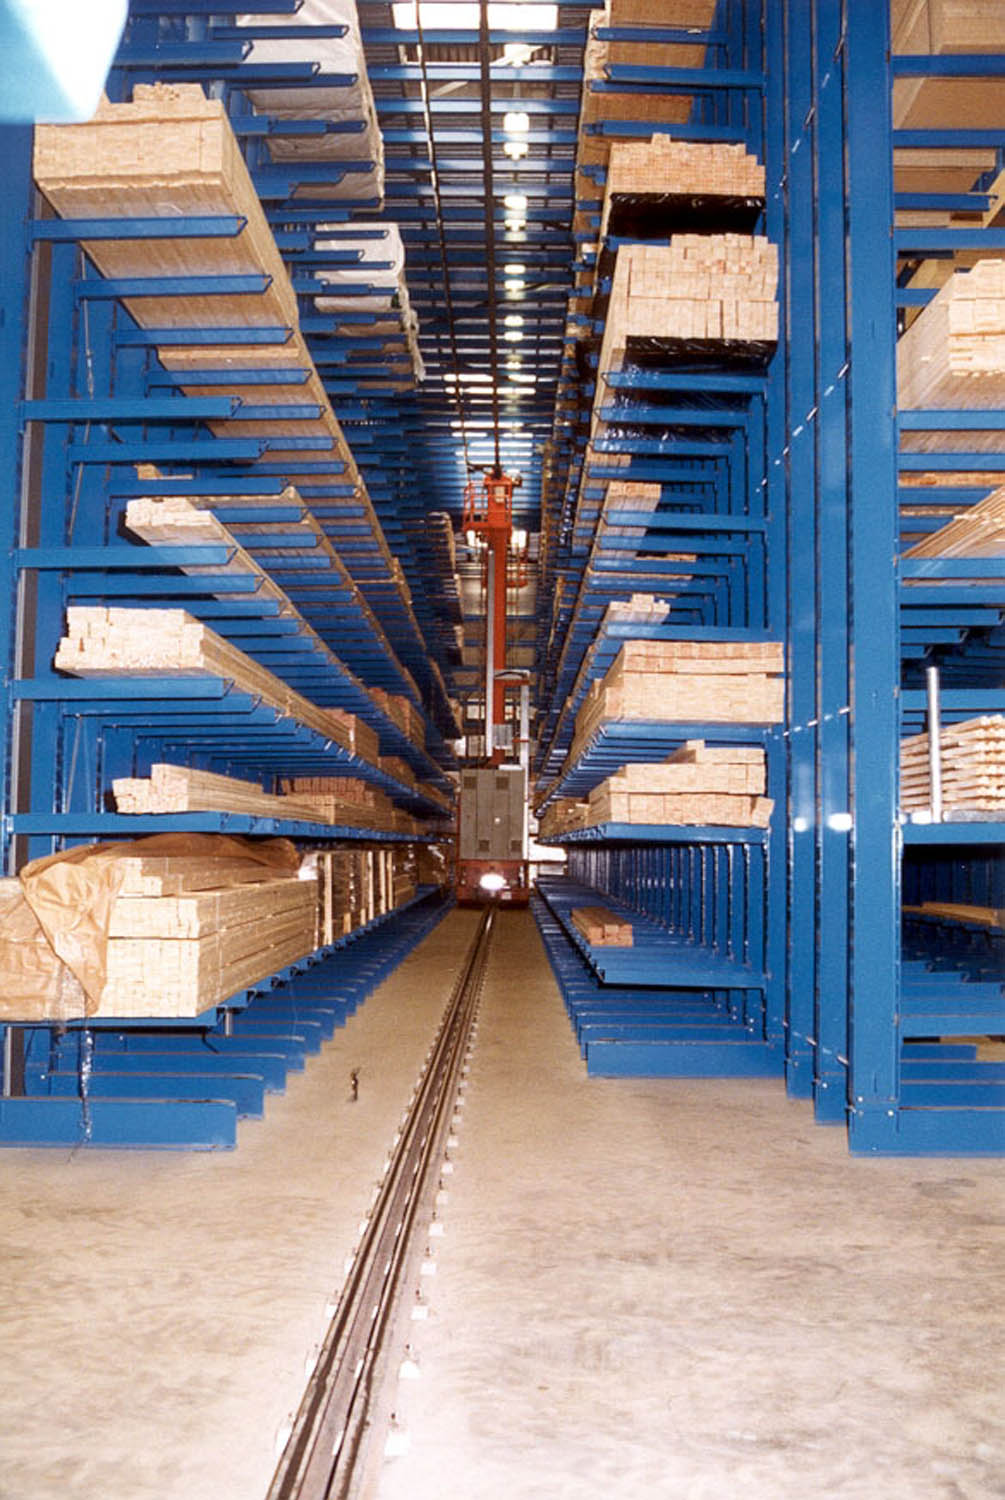 automatic storage systems with stacker crane